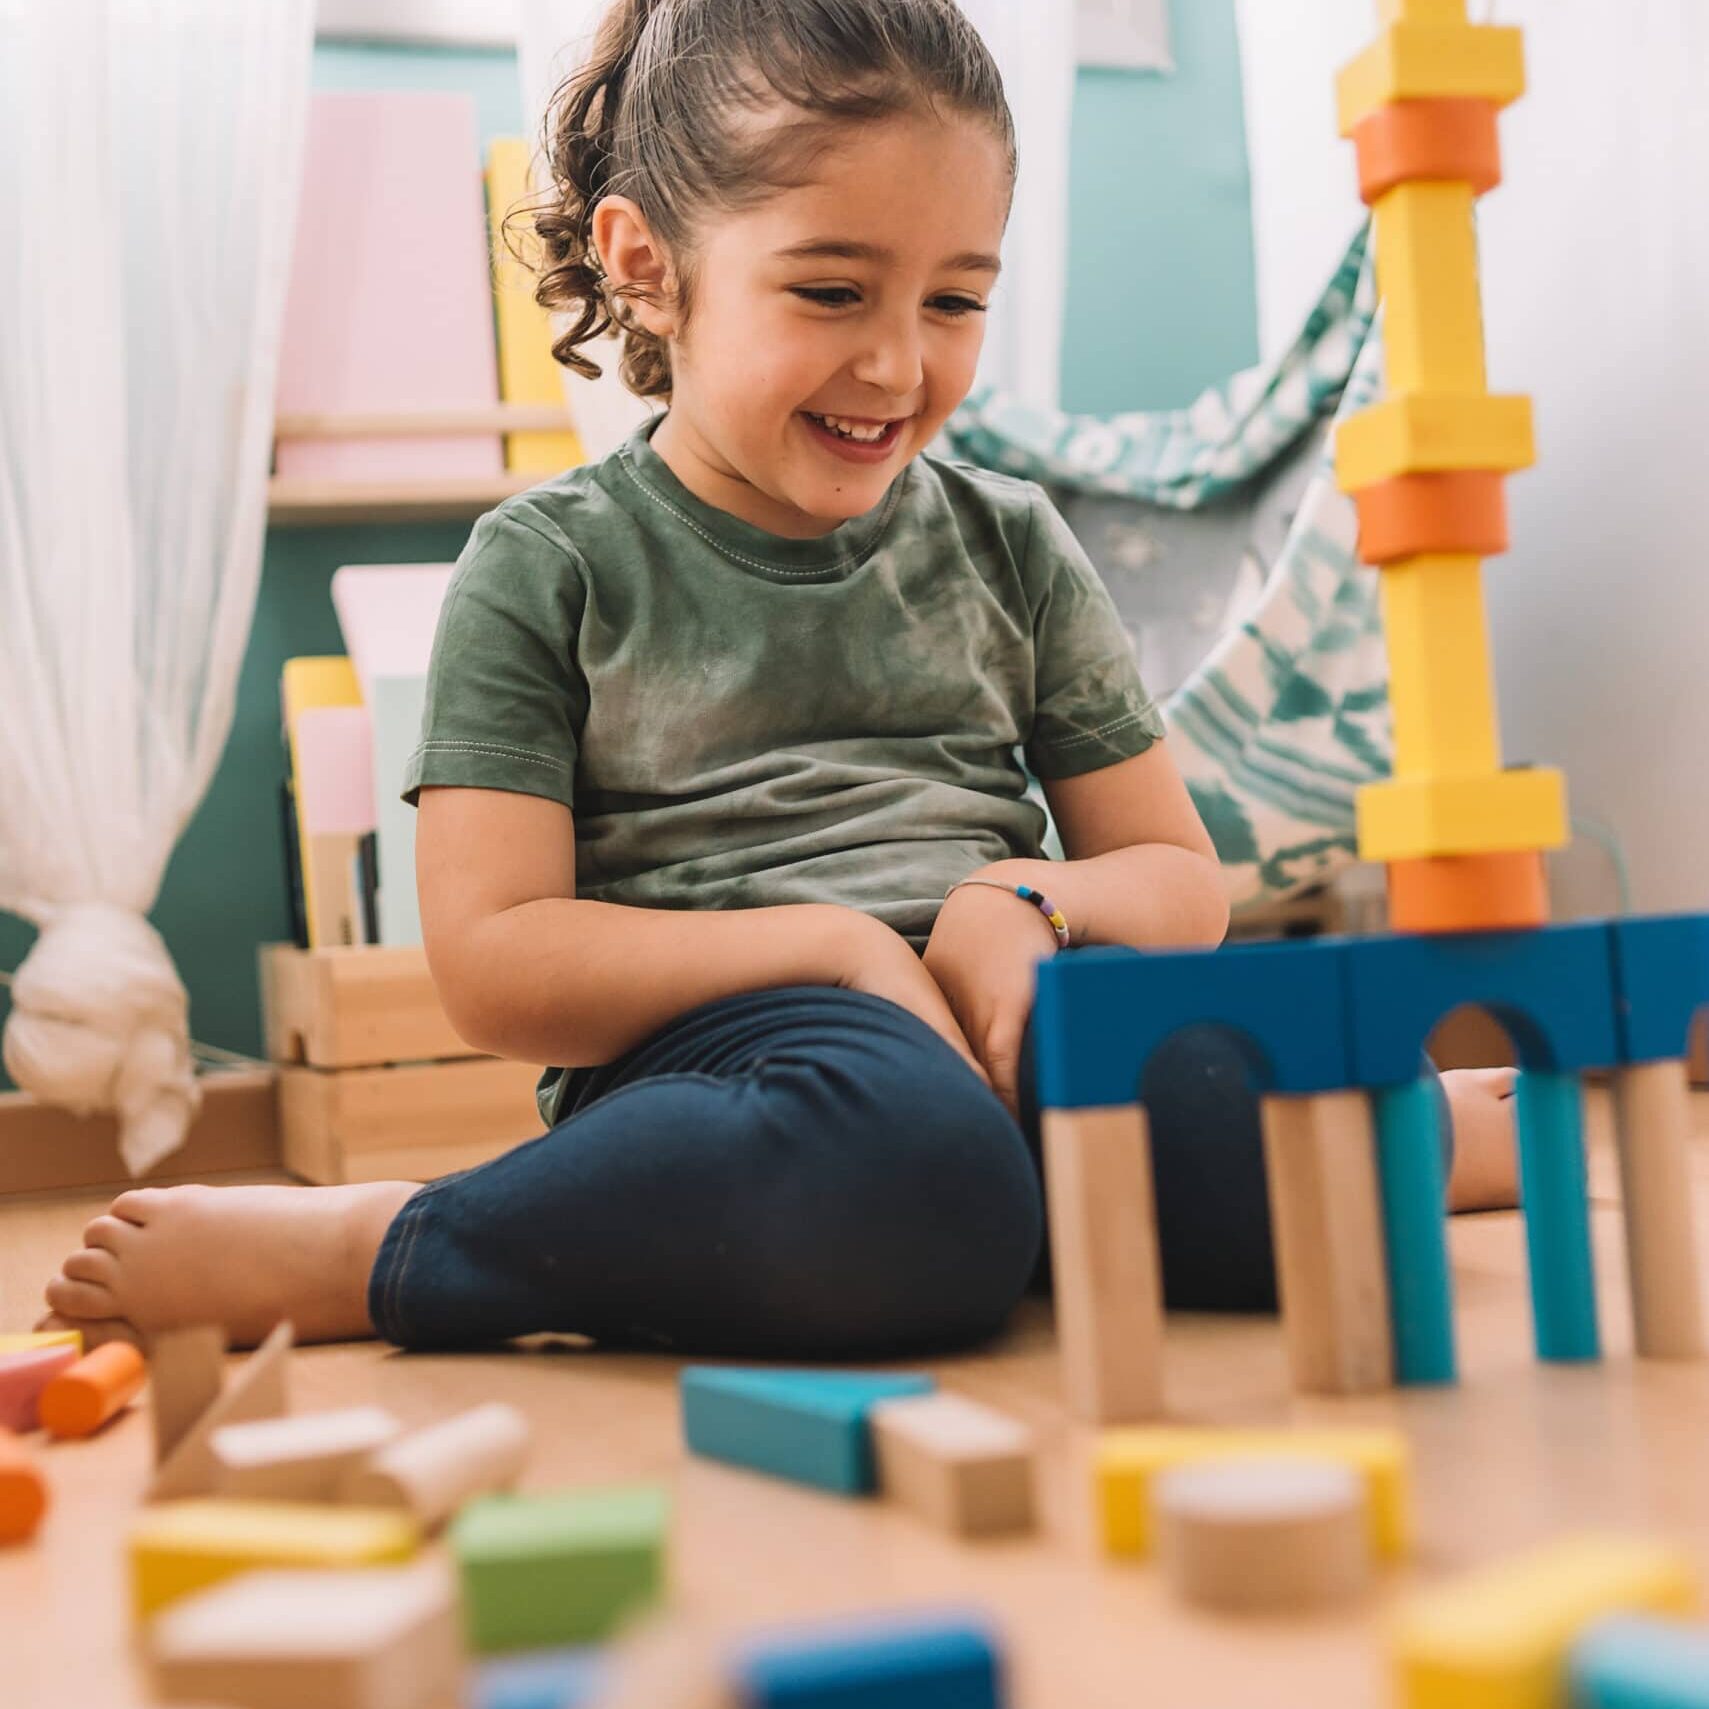 Happy Girl Building With Colorful Wooden Blocks